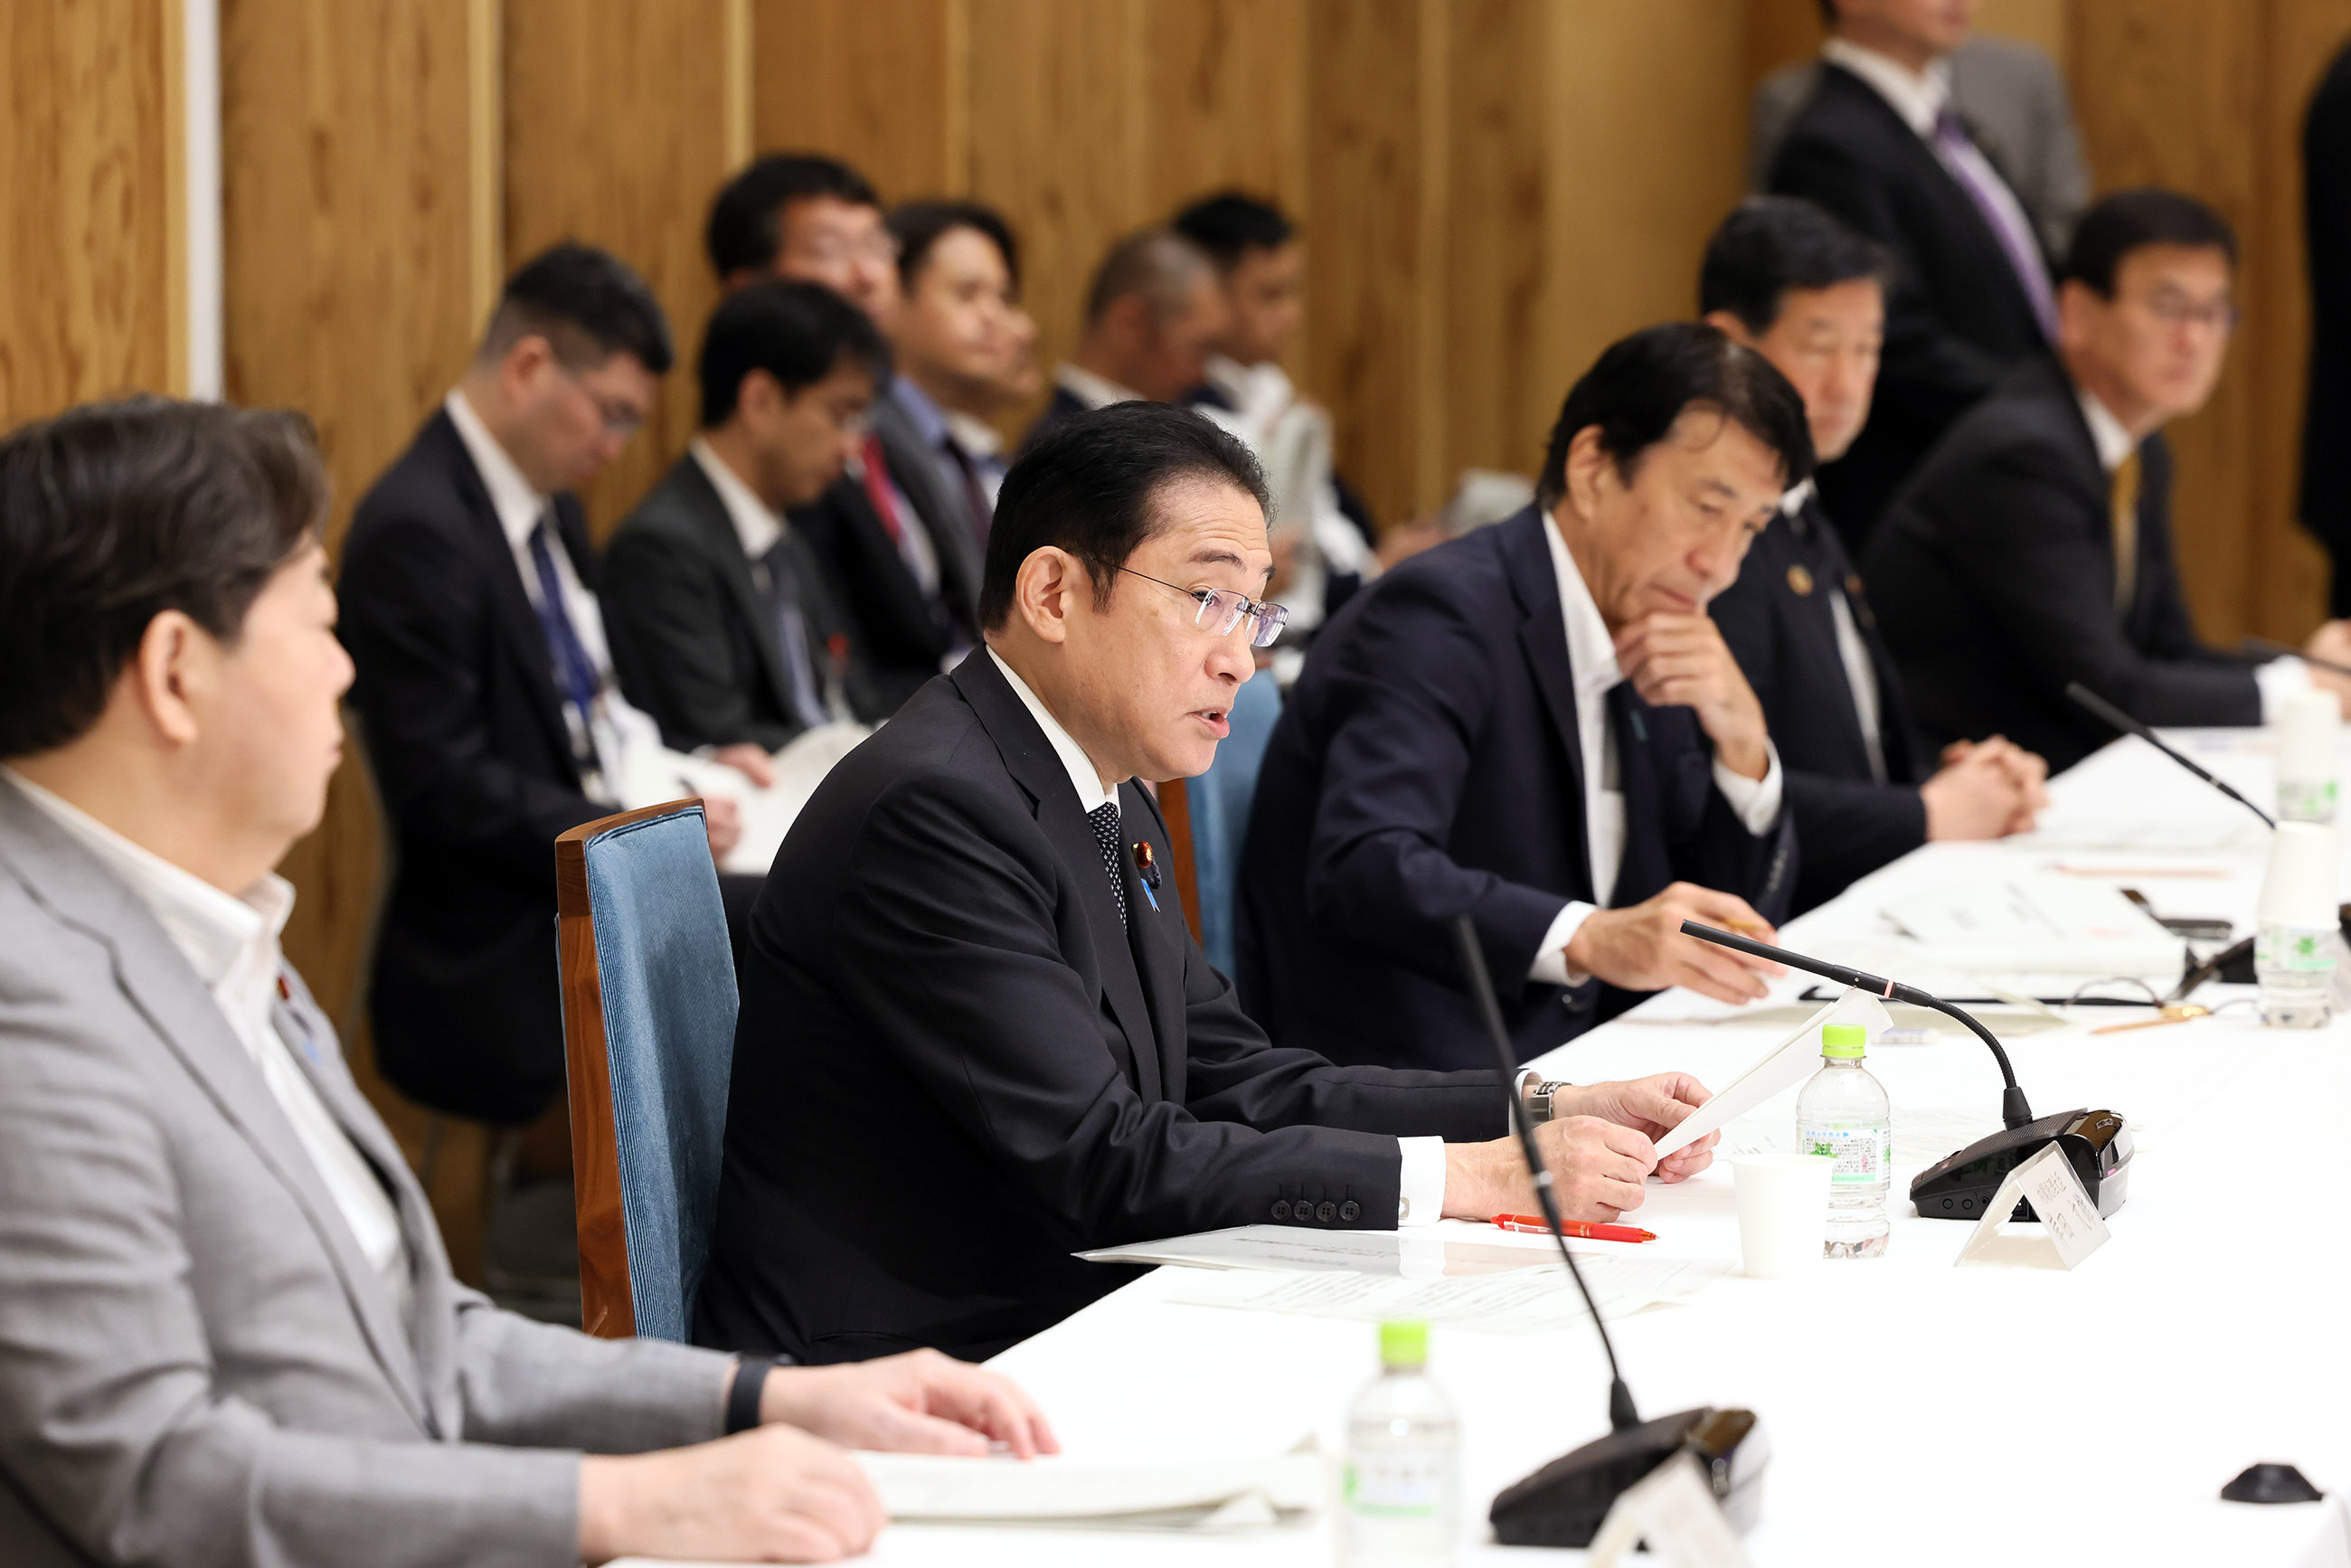 Prime Minister Kishida wrapping up a meeting (2)